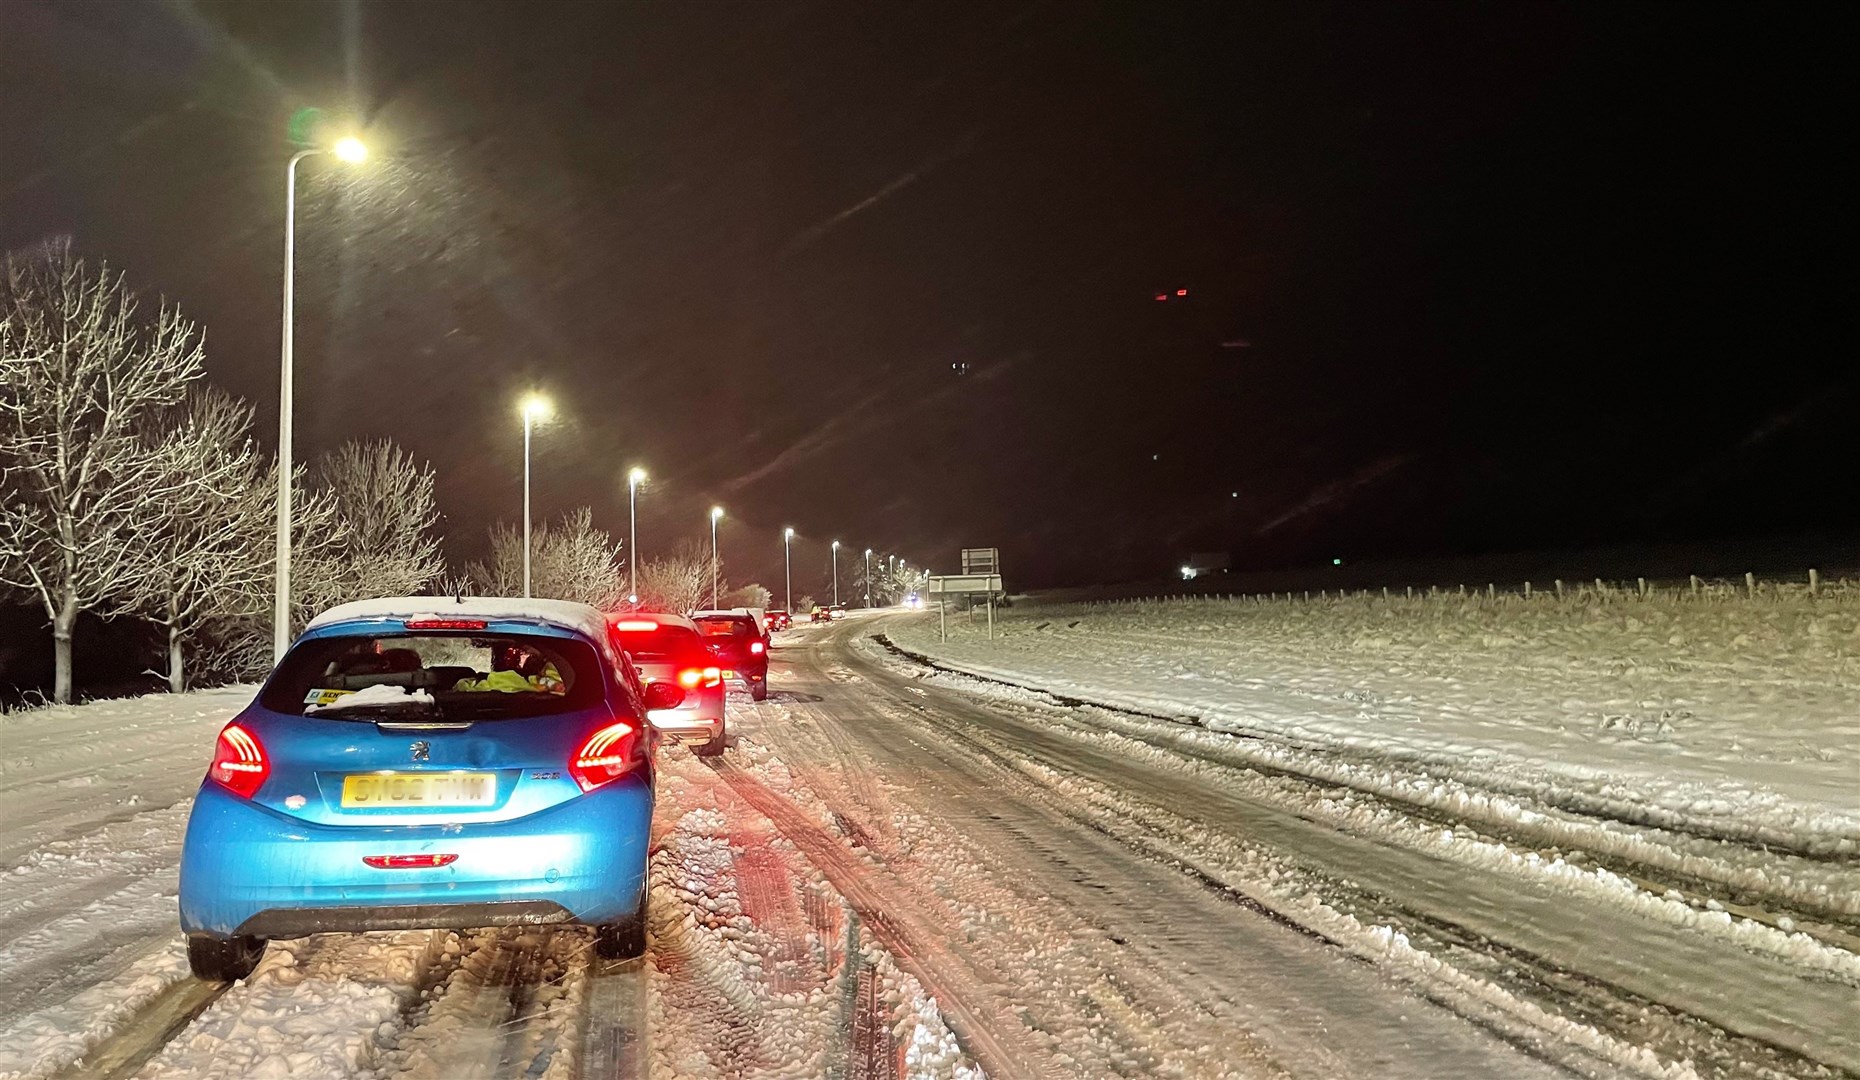 Drivers experienced significant delays on the A9 bypass outside Tain